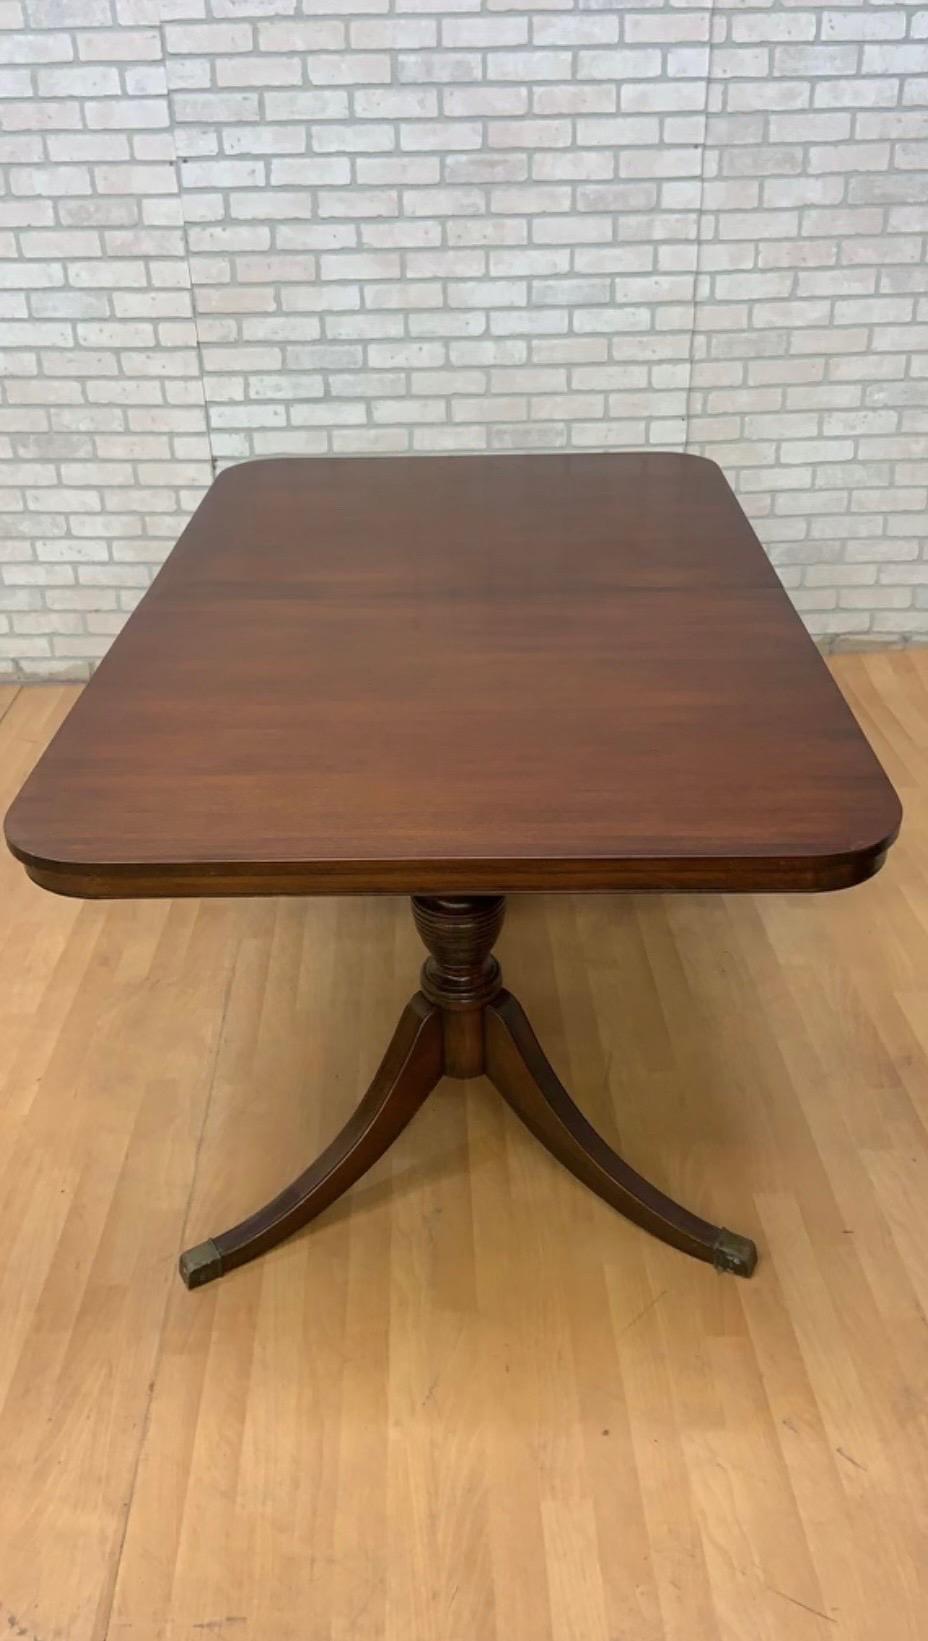 Brass Antique Regency Duncan Phyfe Style Mahogany Dining Table w/ 3 Leaves For Sale